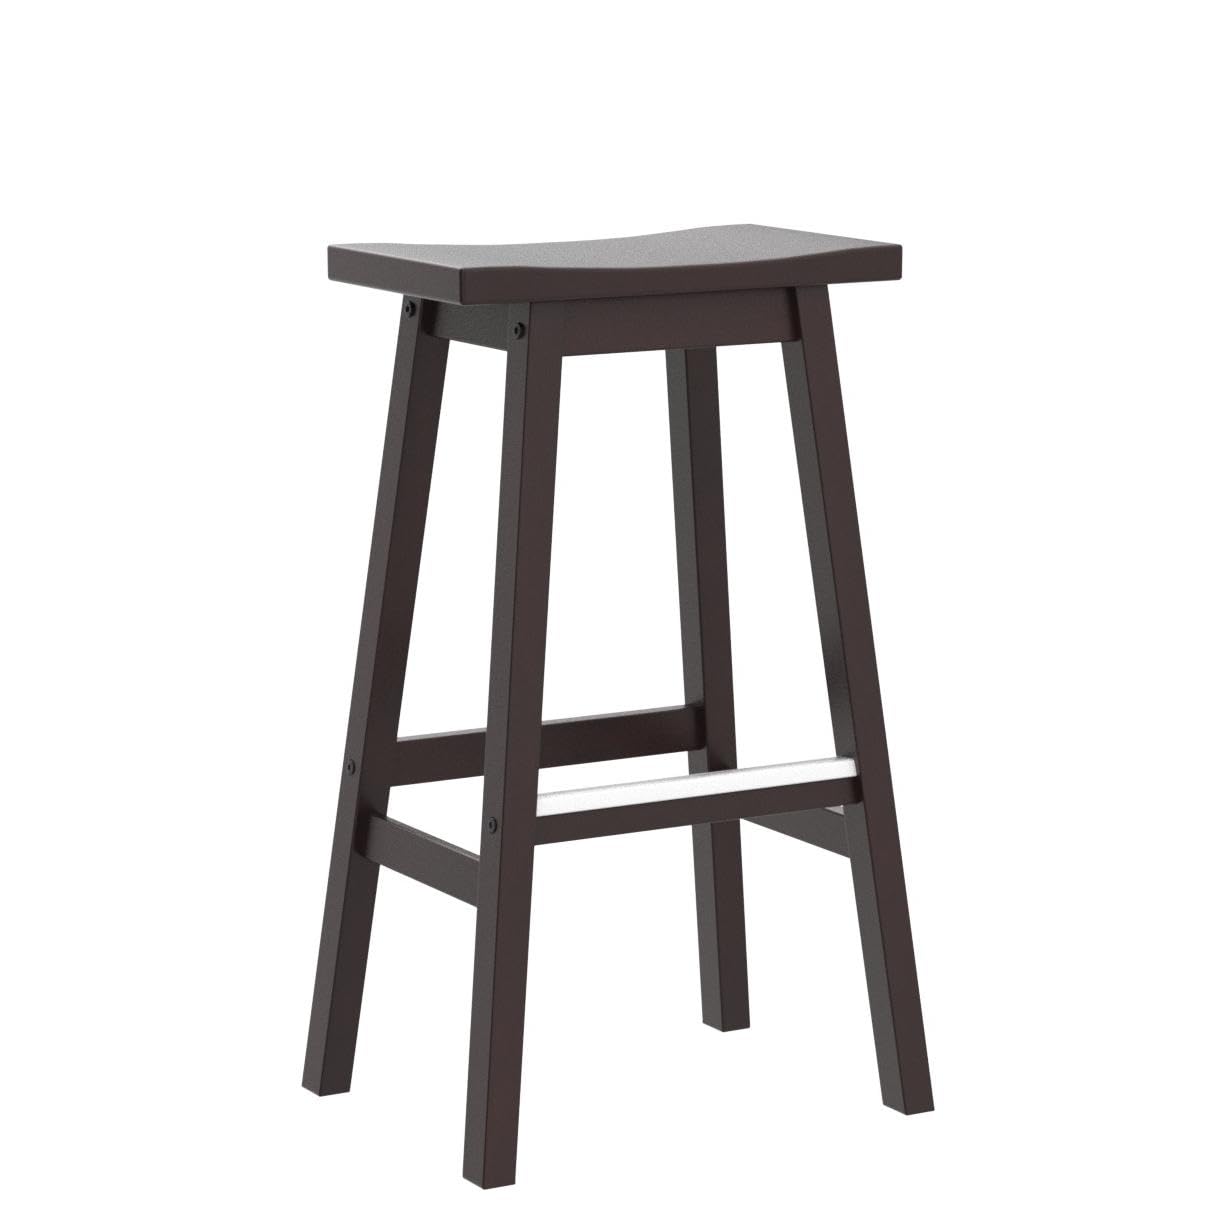 PayLessHere Bar Stools Set of 2 for Kitchen Counter Solid Wooden Saddle Stools 30-Inch Height Home Furniture Barstool, Brown